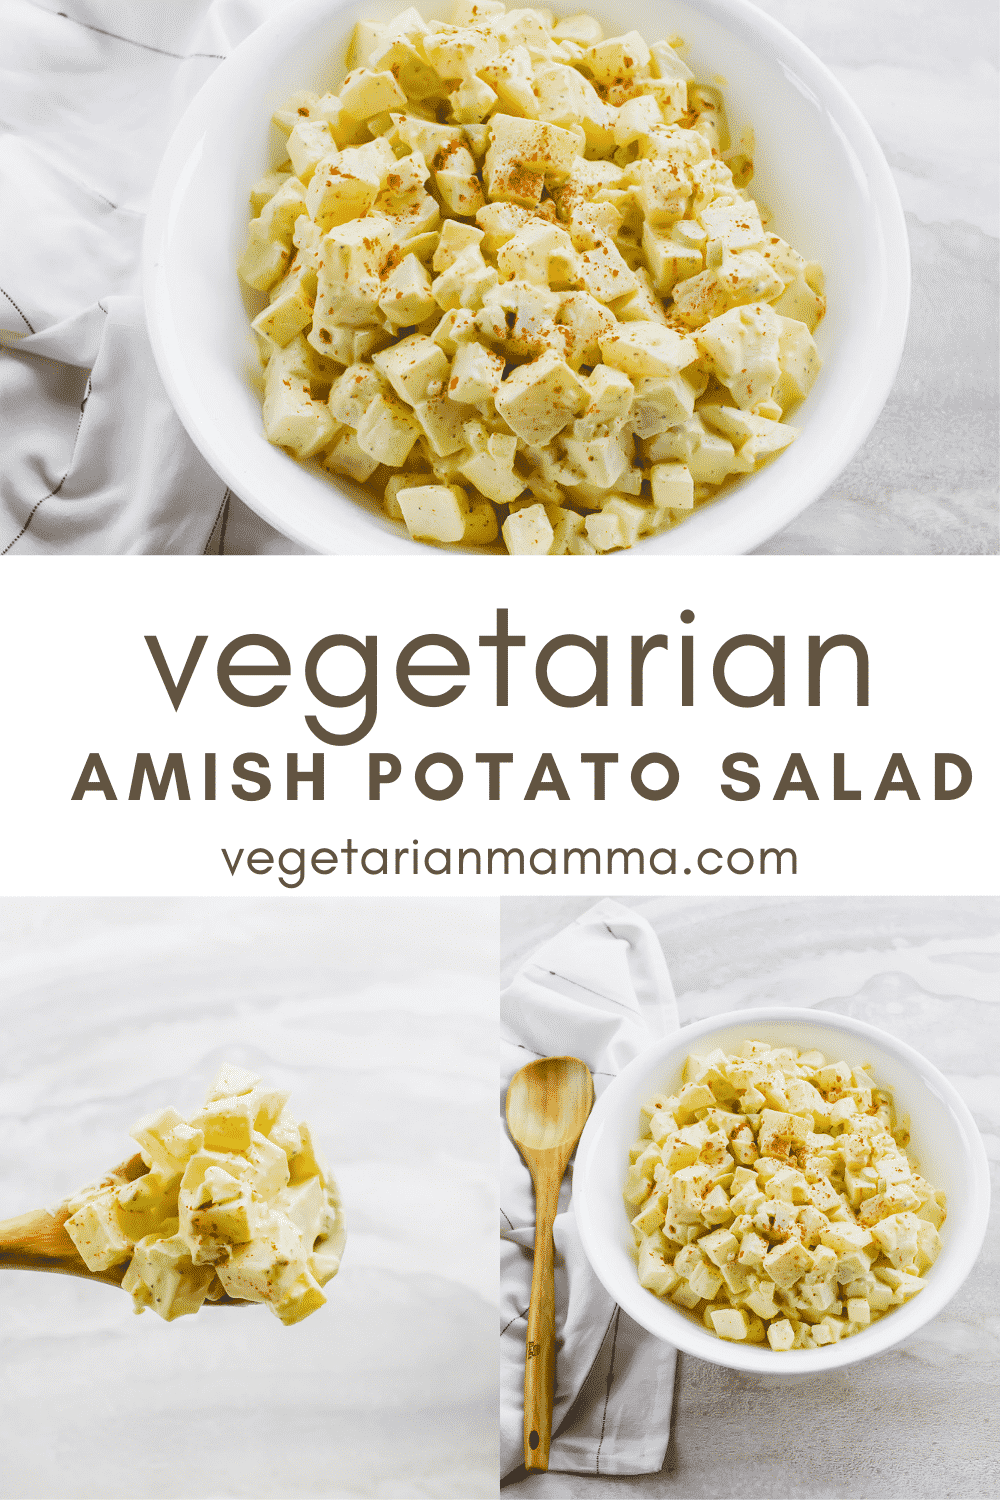 Amish Potato Salad is my favorite BBQ side dish! This is the best potato salad recipe with hard boiled eggs, onions, and celery wrapped in a sweet and tangy yellow mustard dressing. #bbq #easyrecipe #sidedish #amishpotatosalad #potatosalad